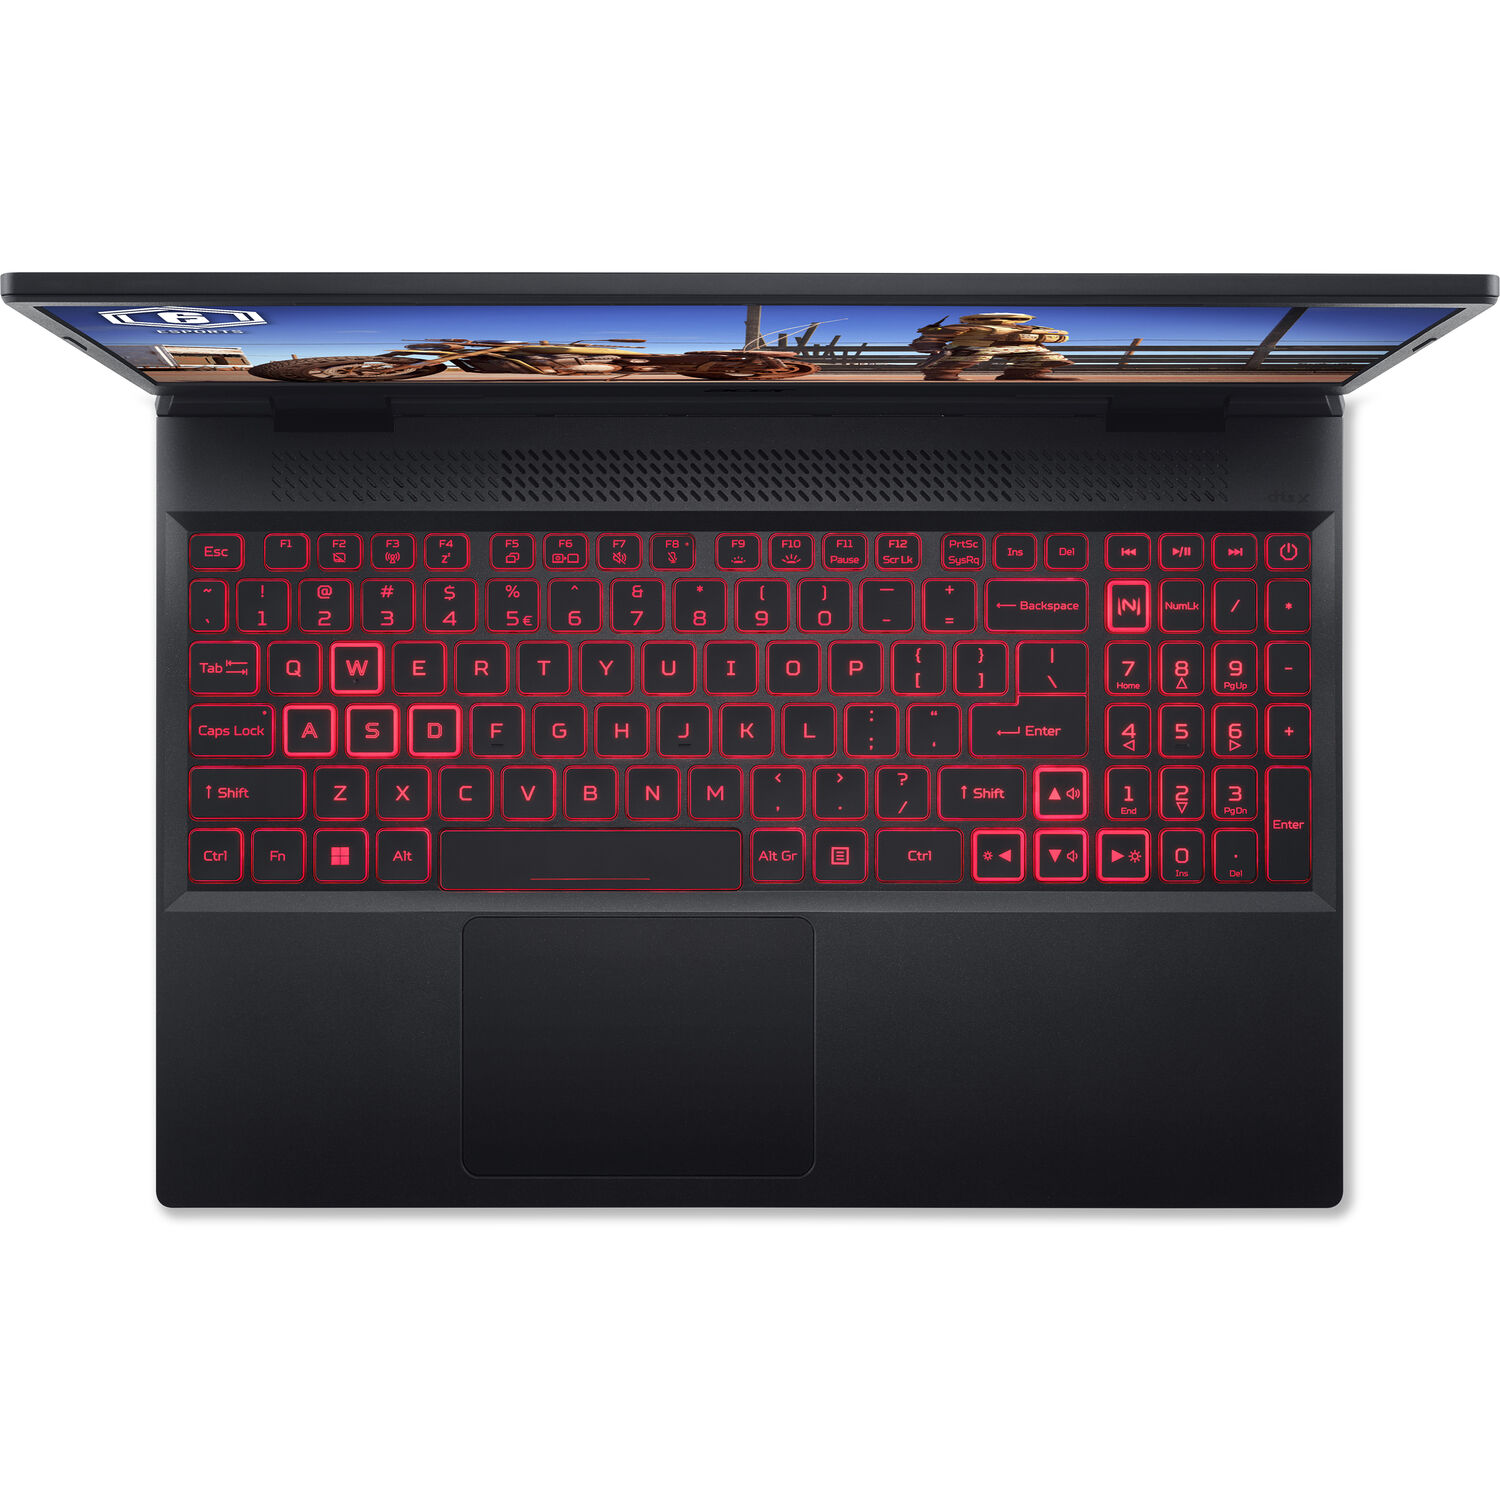 Acer Acer Nitro 5 Gaming/Entertainment Laptop (Intel i5-12500H 12-Core, 17.3in 144Hz Full HD (1920x1080), NVIDIA RTX 3050, 16GB RAM, 1TB PCIe SSD, Backlit KB, Win 11 Home) - image 4 of 7